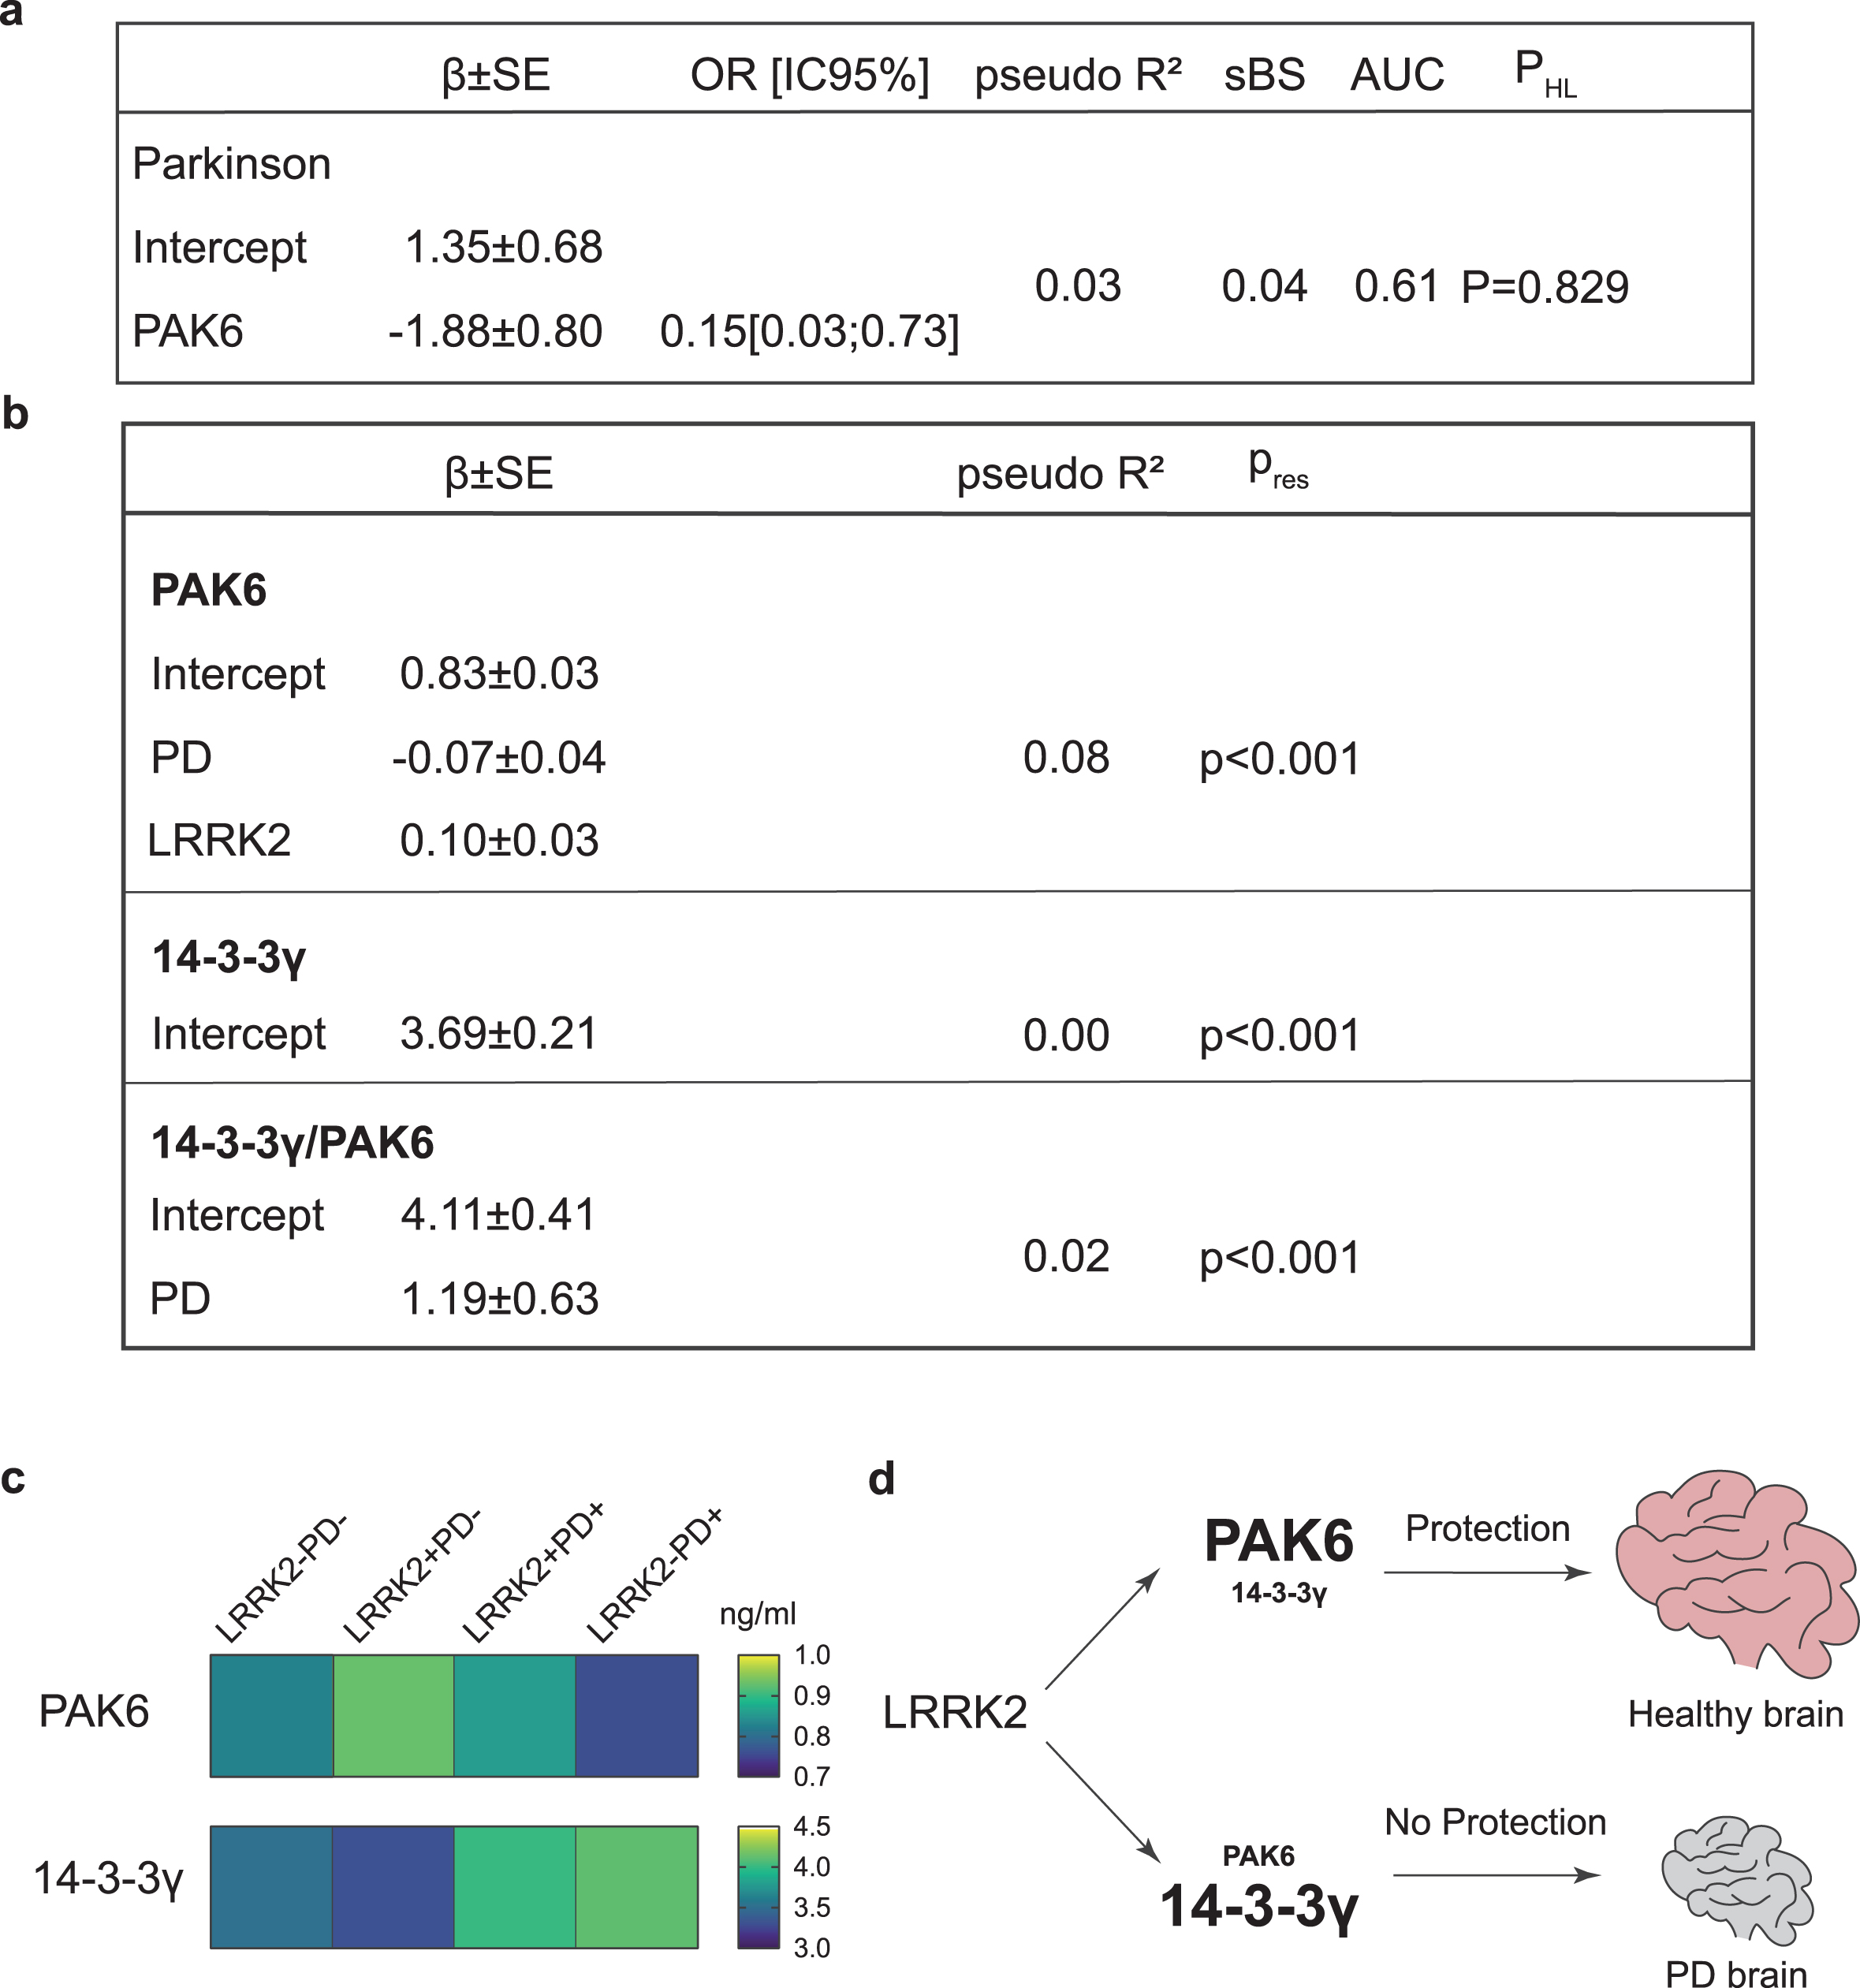 Generalized linear models for the presence of PD, PAK6, 14-3-3γ and 14-3-3γ/PAK6. Generalized linear models, showing the relationship between the PAK6 amount and the probability of having Parkinson’s disease (a) and the relationship between PAK6, 14-3-3γ and 14-3-3γ/PAK6 and different parameters as described in the text (b). Outcomes are displayed as estimate of regression coefficient with Standard Error (β±SE); McFadden’s index of explained variance (pseudo-R2); Scaled Brier Score (sBS); Area Under the Curve (AUC); p-value of the Hosmer-Lemeshow test (PHL) or p-value of the Shapiro Wilk test of model residuals (Pres). Significance was established at P < #x003C;< #x200A;0.05*. (c) Gradient color representation of PAK6 and 14-3-3γ amount in plasma samples. (d) Schematic underlying the protective role of PAK6.